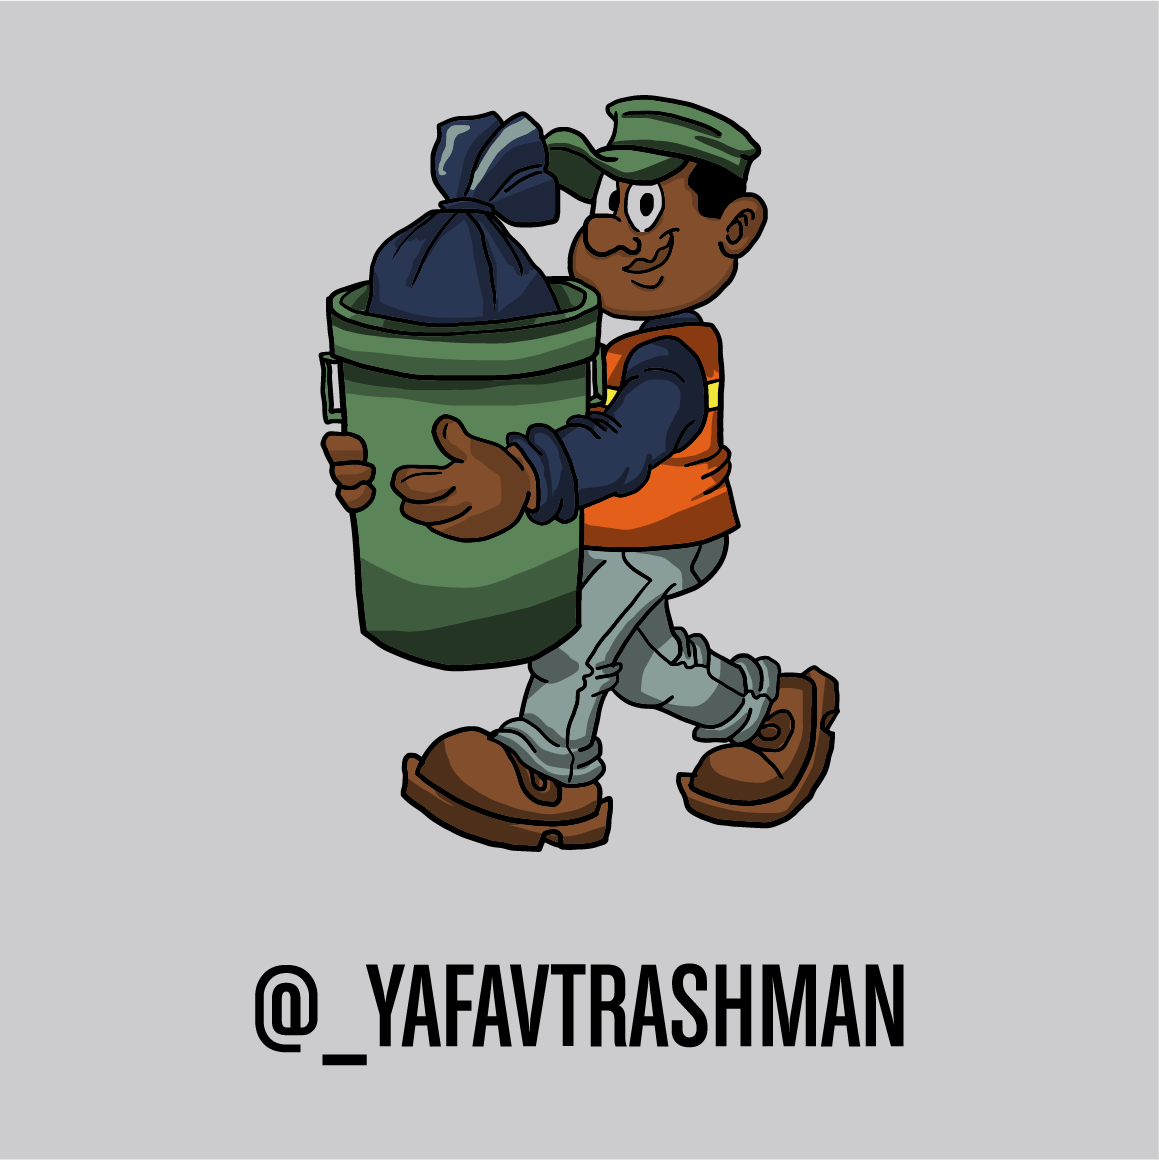 PPE for sanitation workers shirt design - zoomed